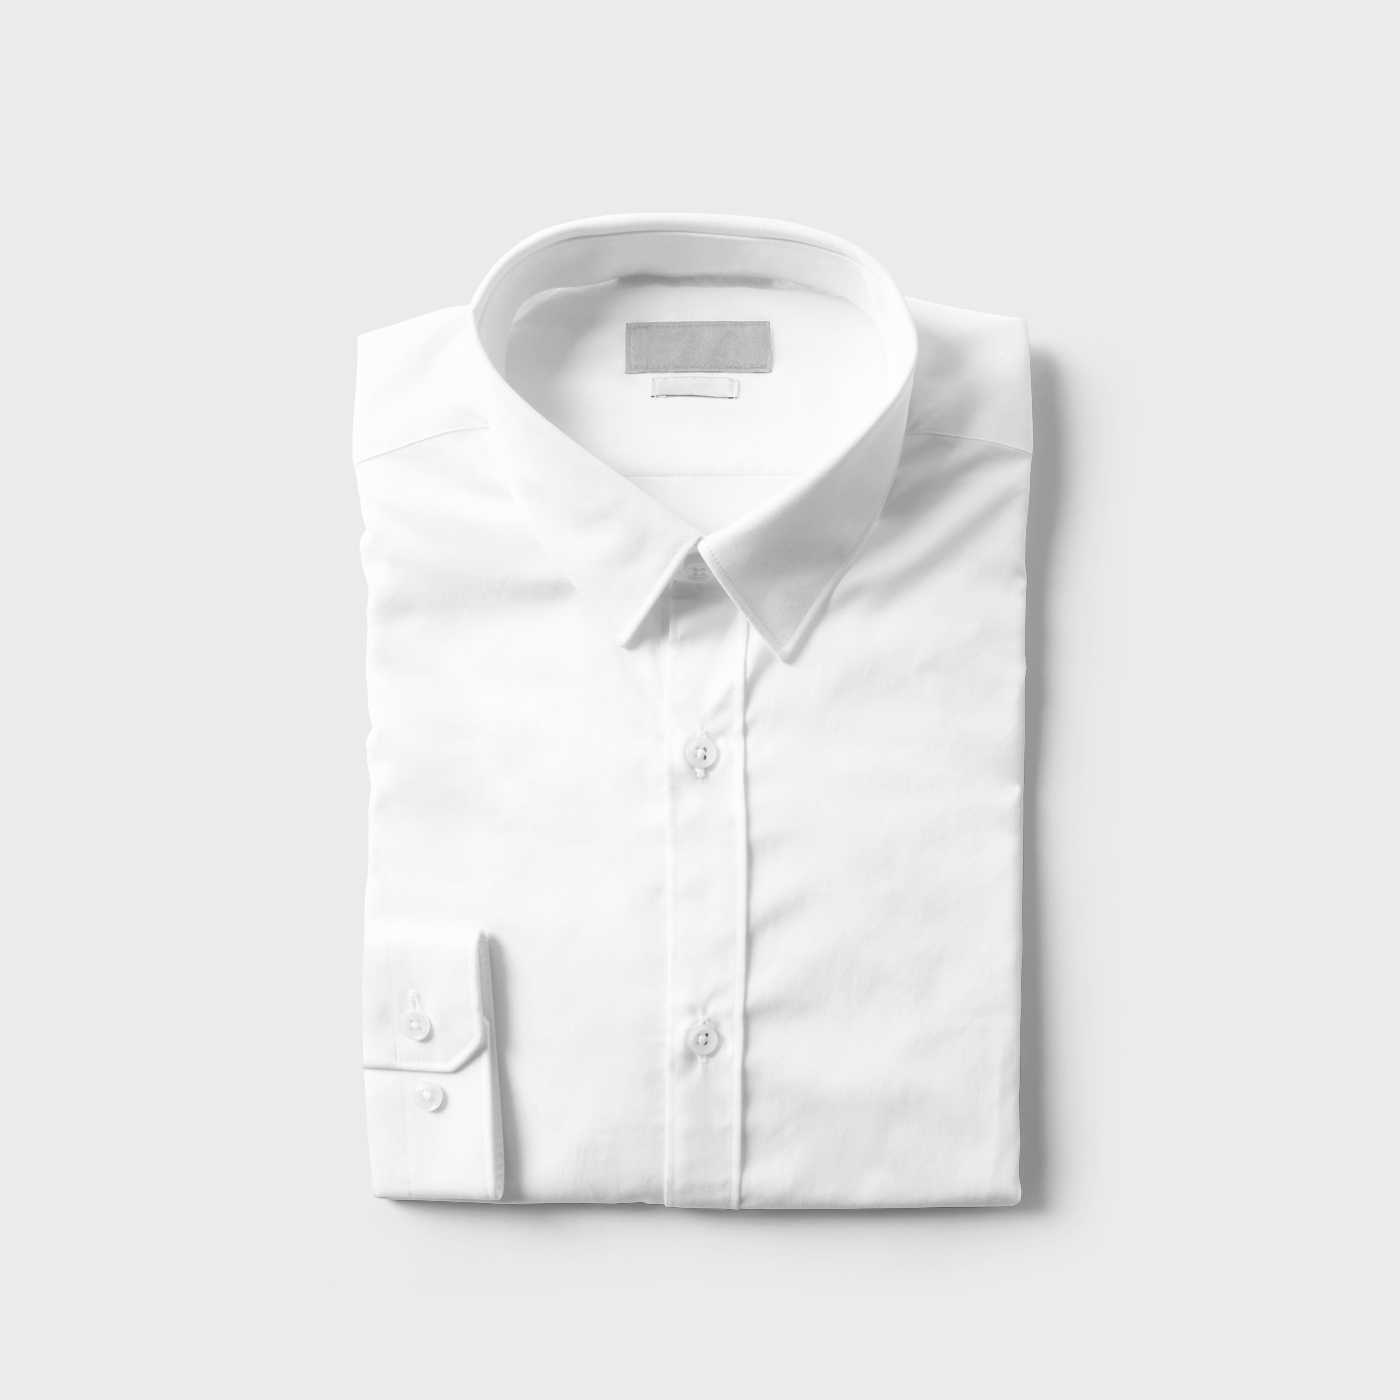 Front View of a Folded Men's Shirt Mockup FREE PSD